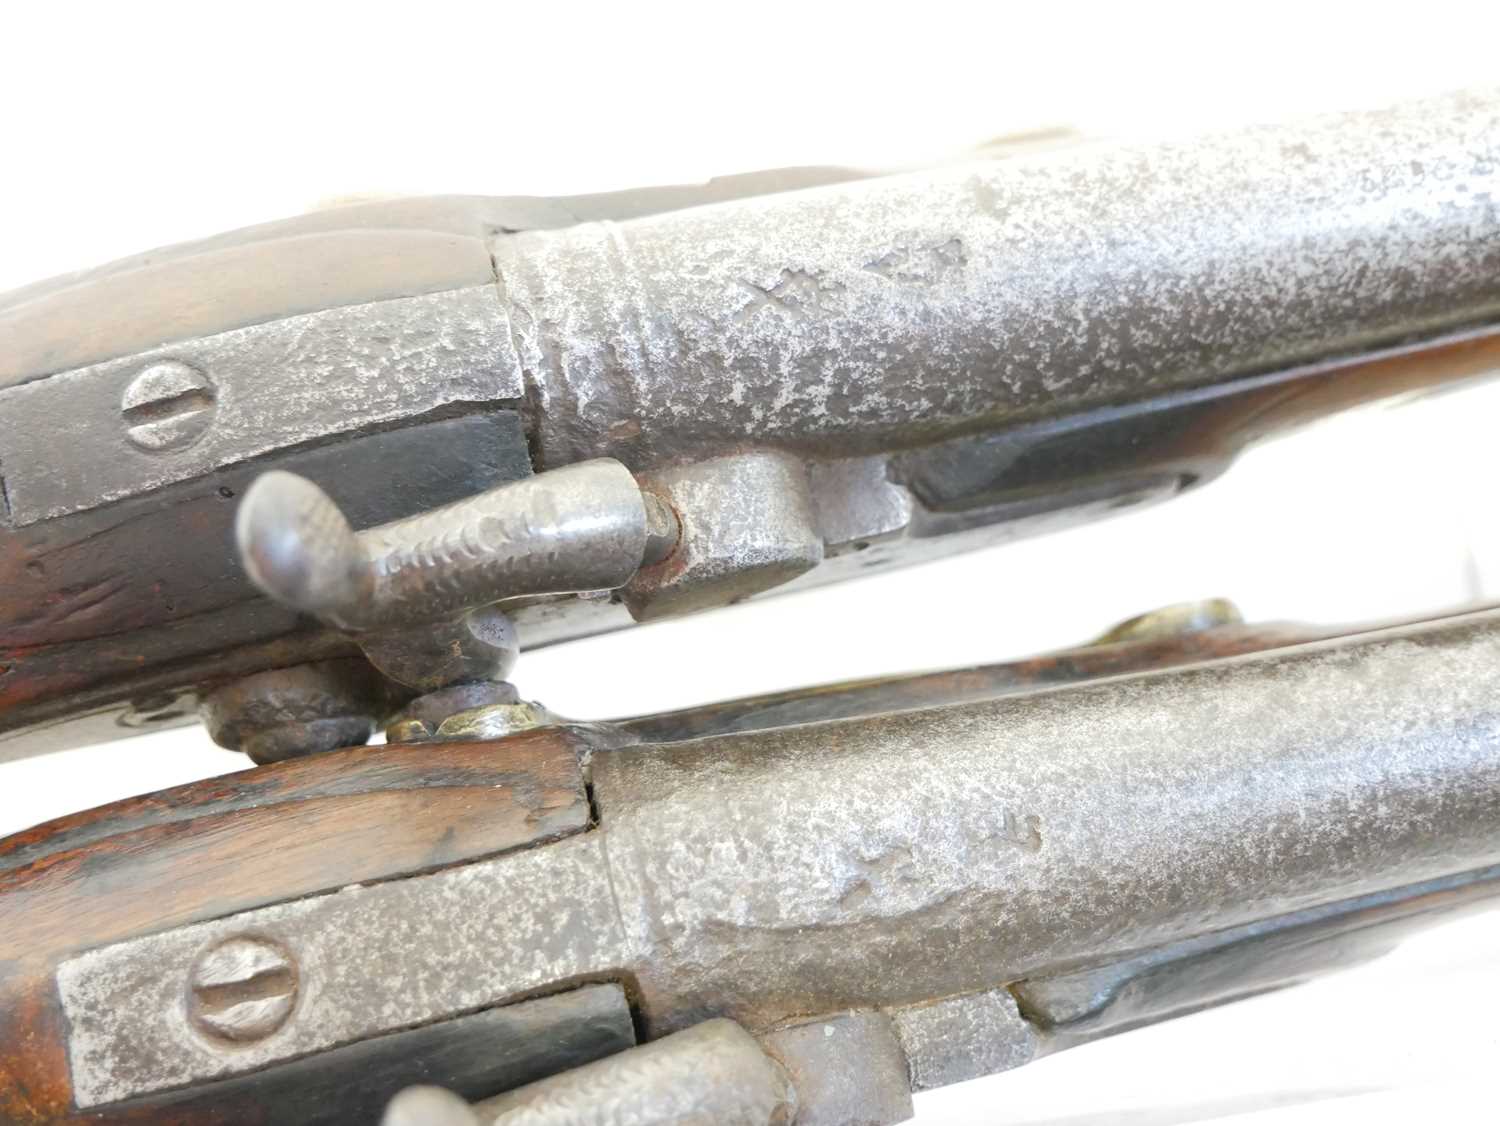 Matched together pair of percussion pistols - Image 8 of 11